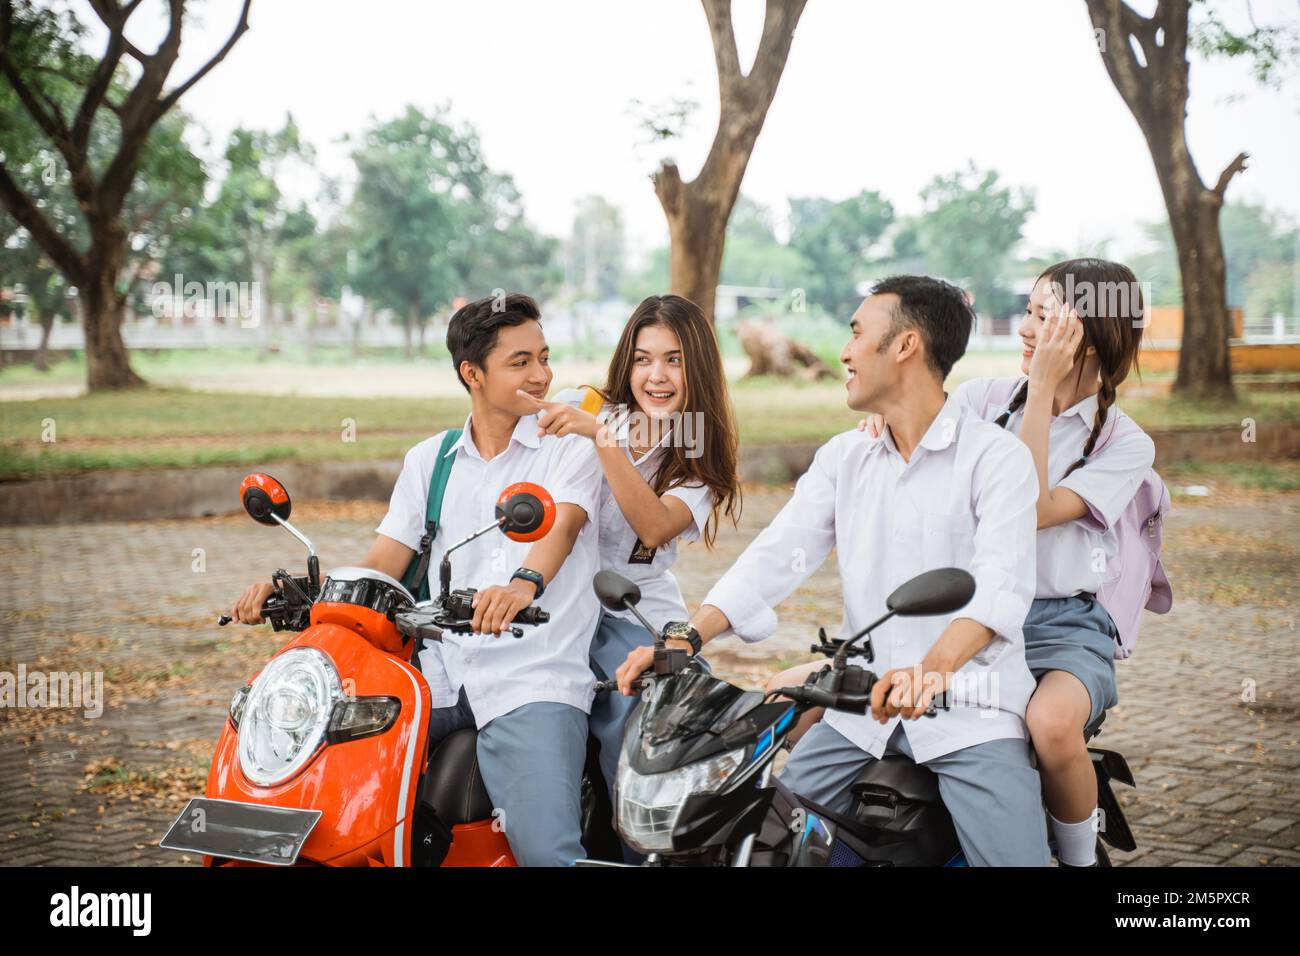 Four students joking while riding a motorbike on the road Stock Photo